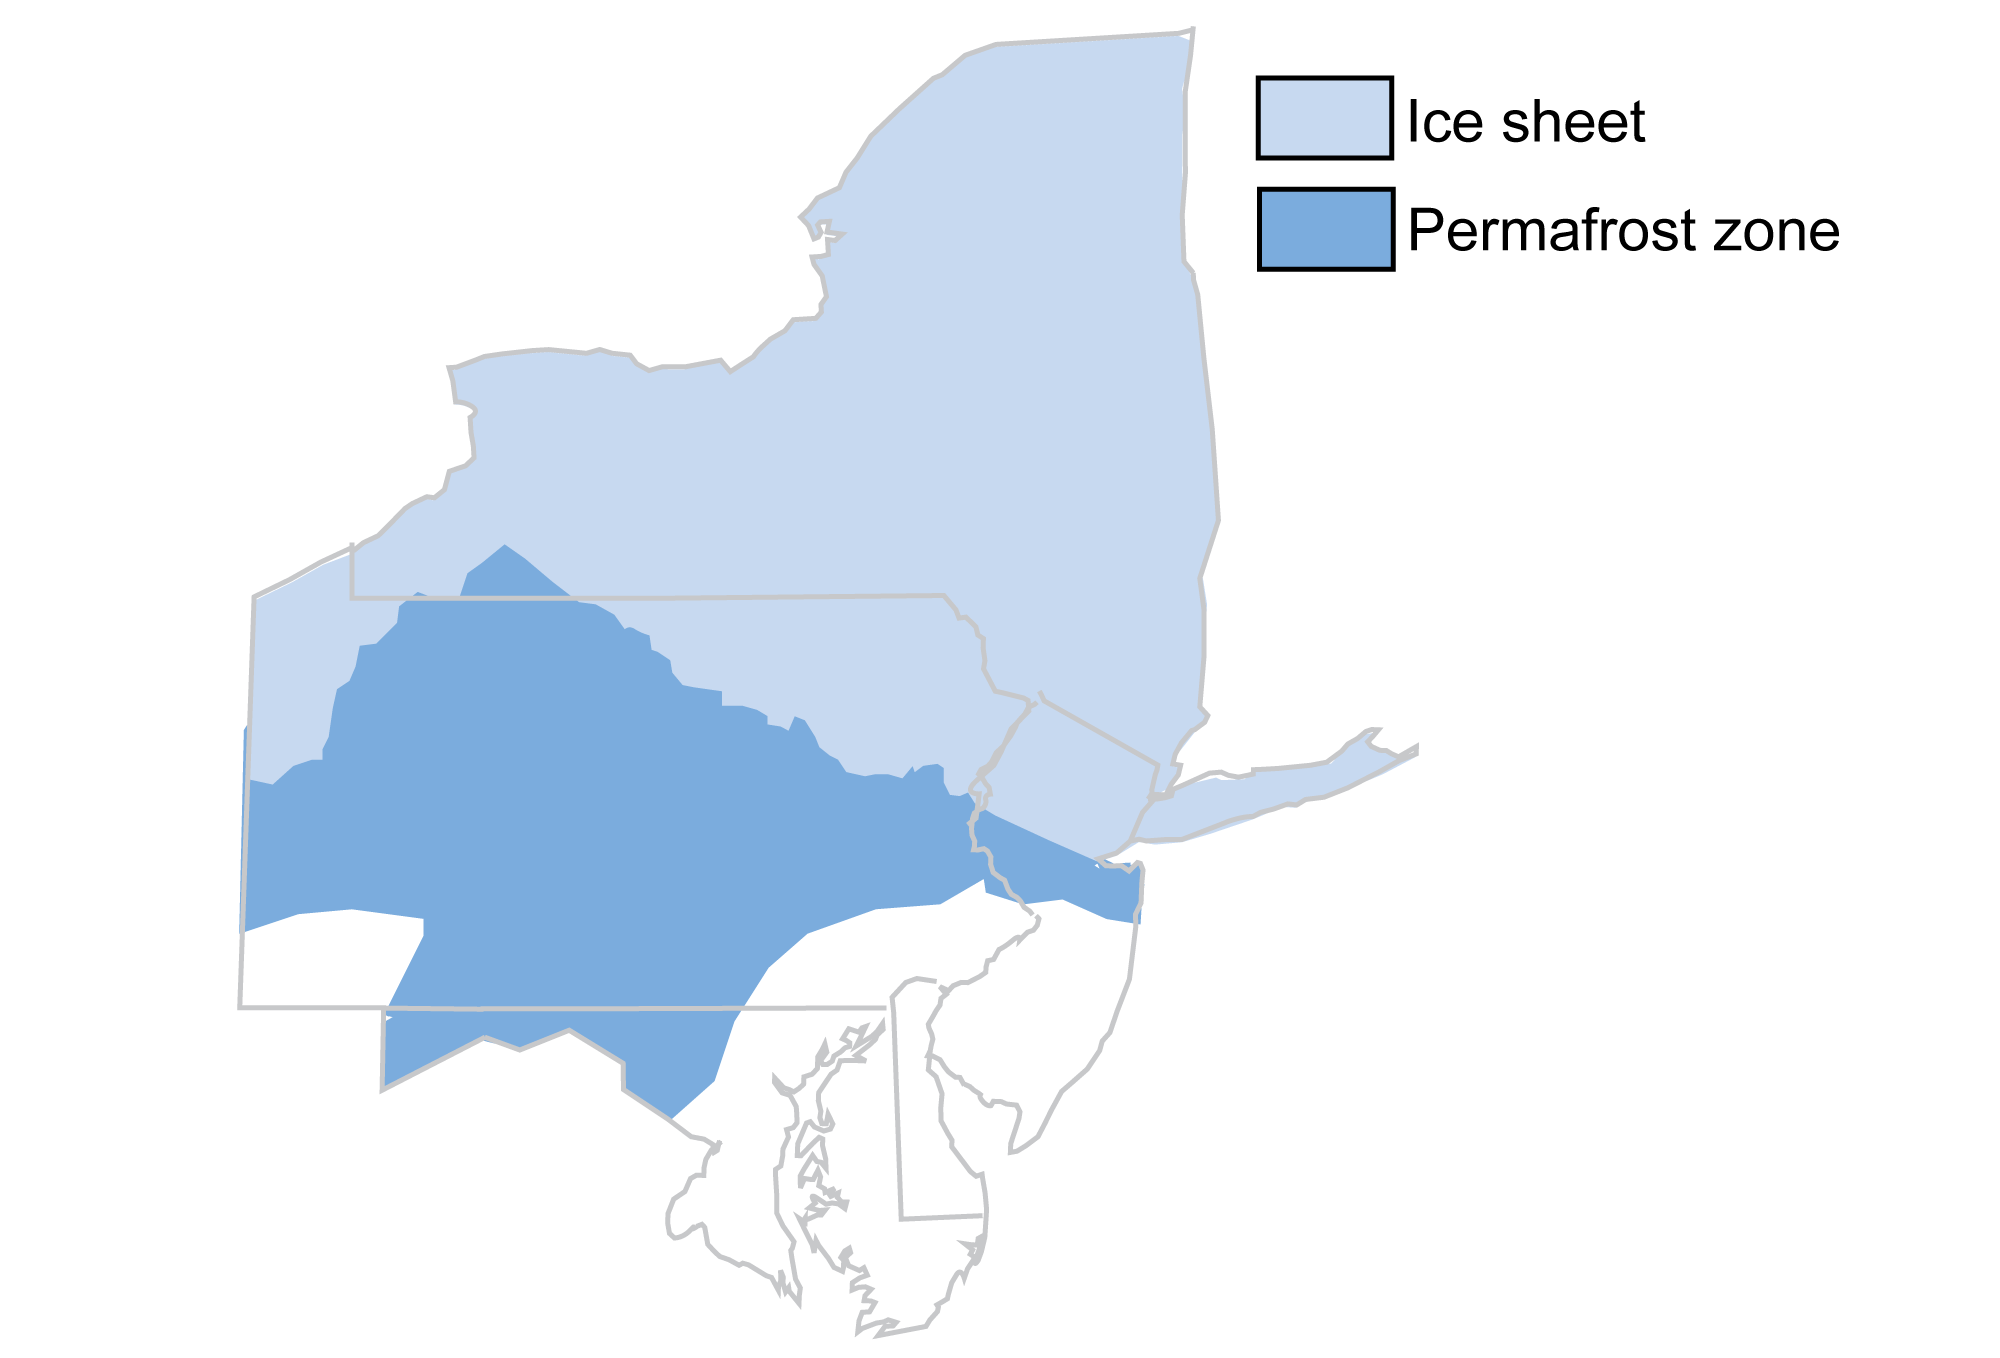 Map of the northeastern United States with state boundaries outlined in light gray; Maine is not included on the map. Light blue shading shows the maximum extent of the ice sheet at the last glacial maximum. It extended from northwestern Pennsylvania, north into southwestern New York, and southeast across Pennsylvania and across northern New Jersey and southern Long Island. The permafrost or periglacial zone is shaded medium blue. This zone covers much of the unglaciated region of Pennsylvania (except the southwest and southeast corners), western Maryland, and a strip across central New Jersey.